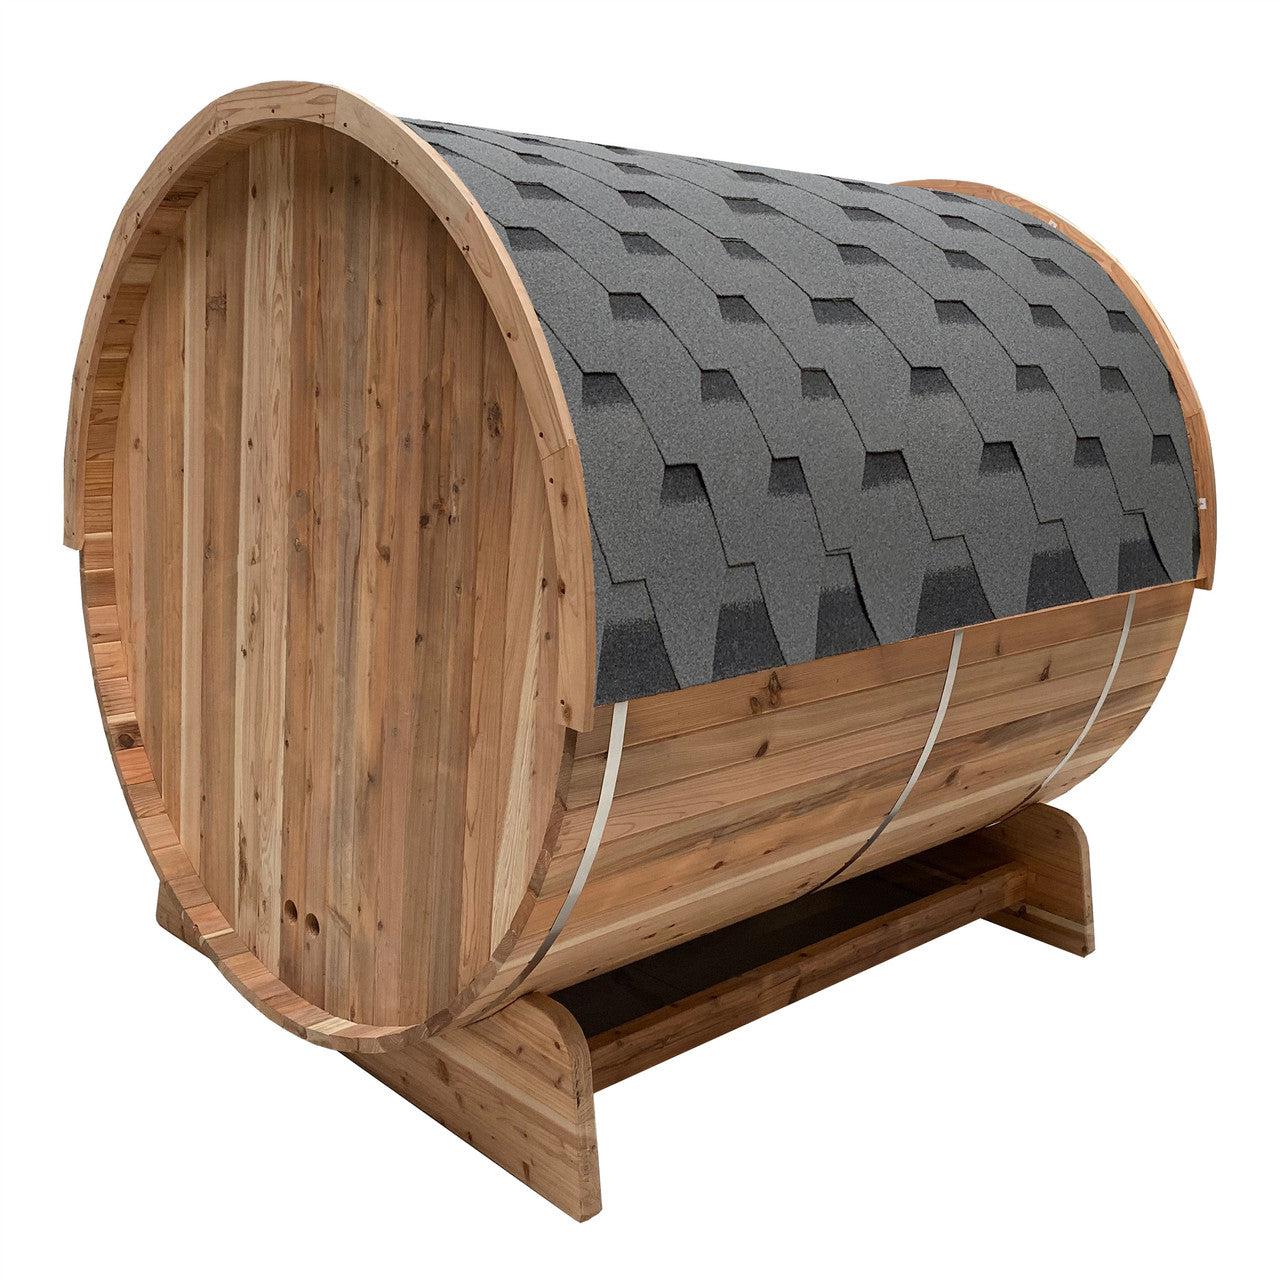 ALEKO Outdoor Rustic Cedar 4 Person Barrel Steam Sauna With Heater - Front Porch Canopy -SB4CED-AP - Purely Relaxation